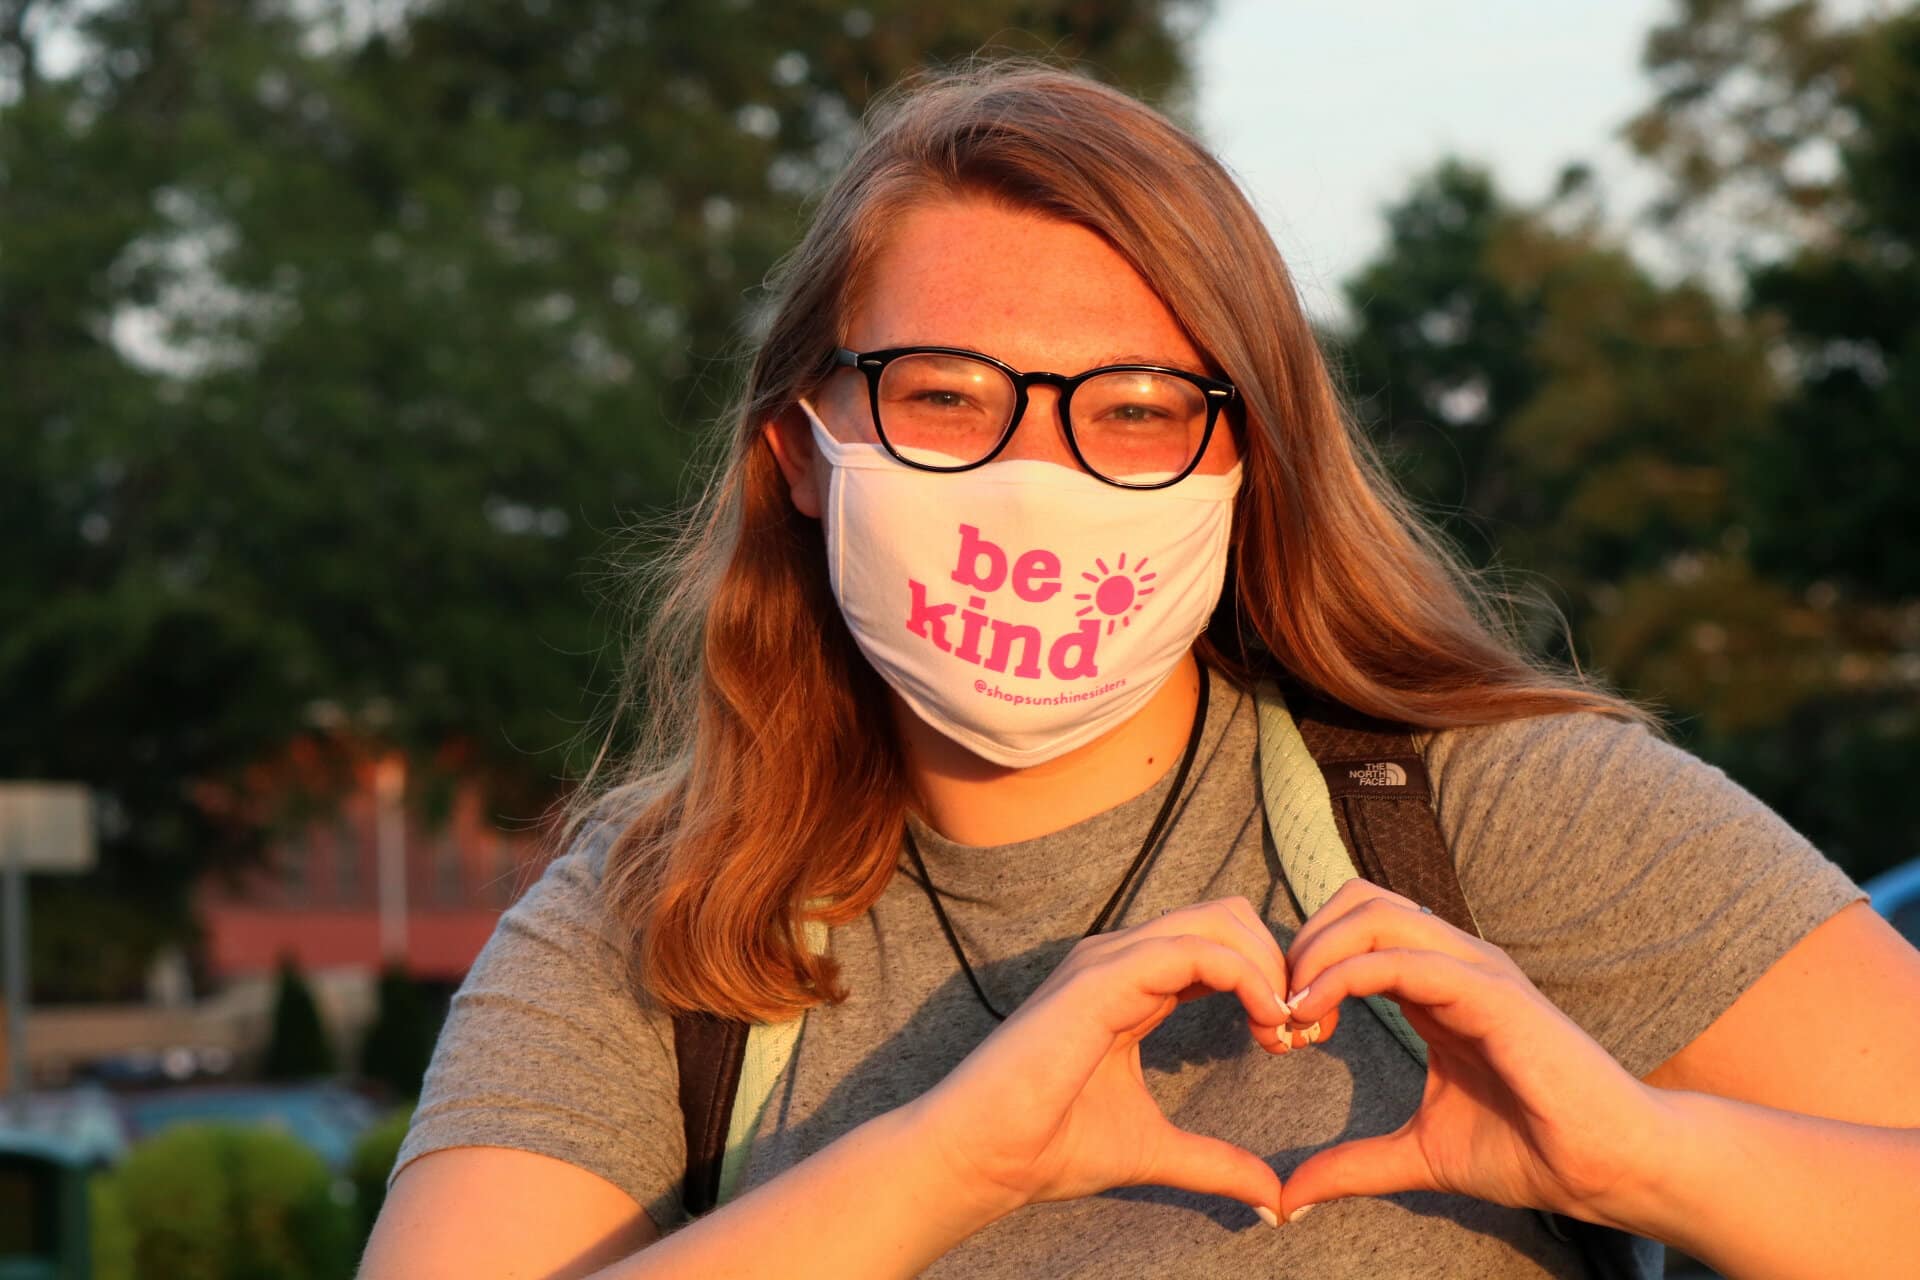 Caroline has a heart of gold and wears her mask to help spread love, peace and kindness around campus.